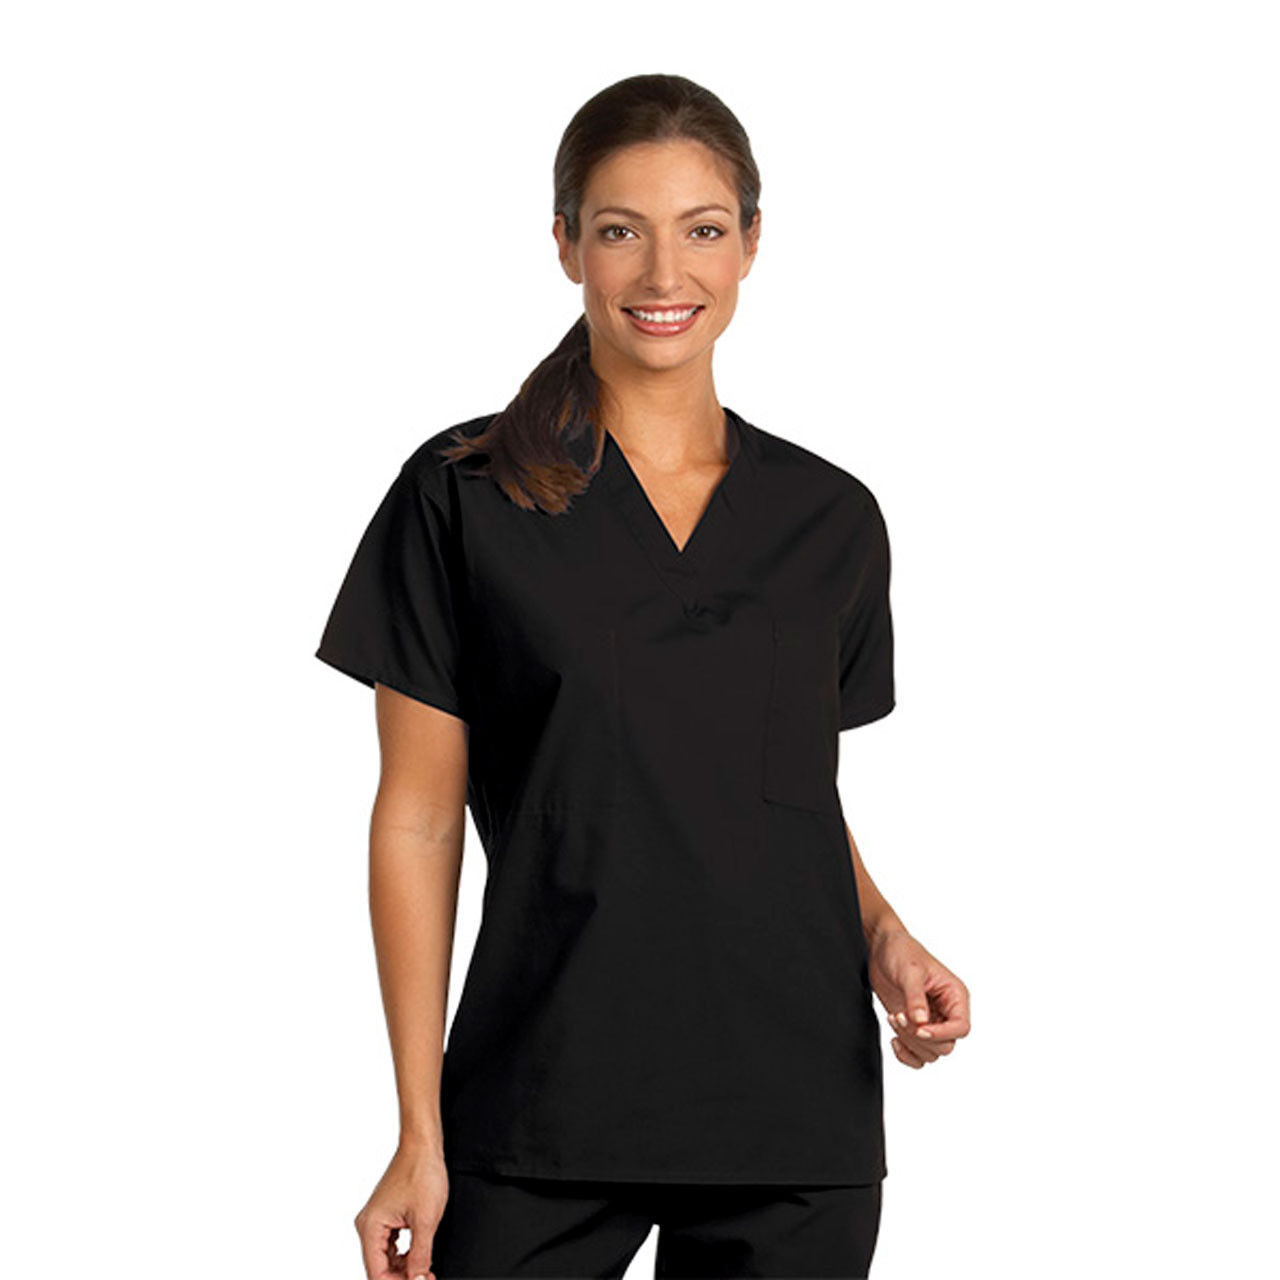 Is the stitching double on the black medical scrubs?